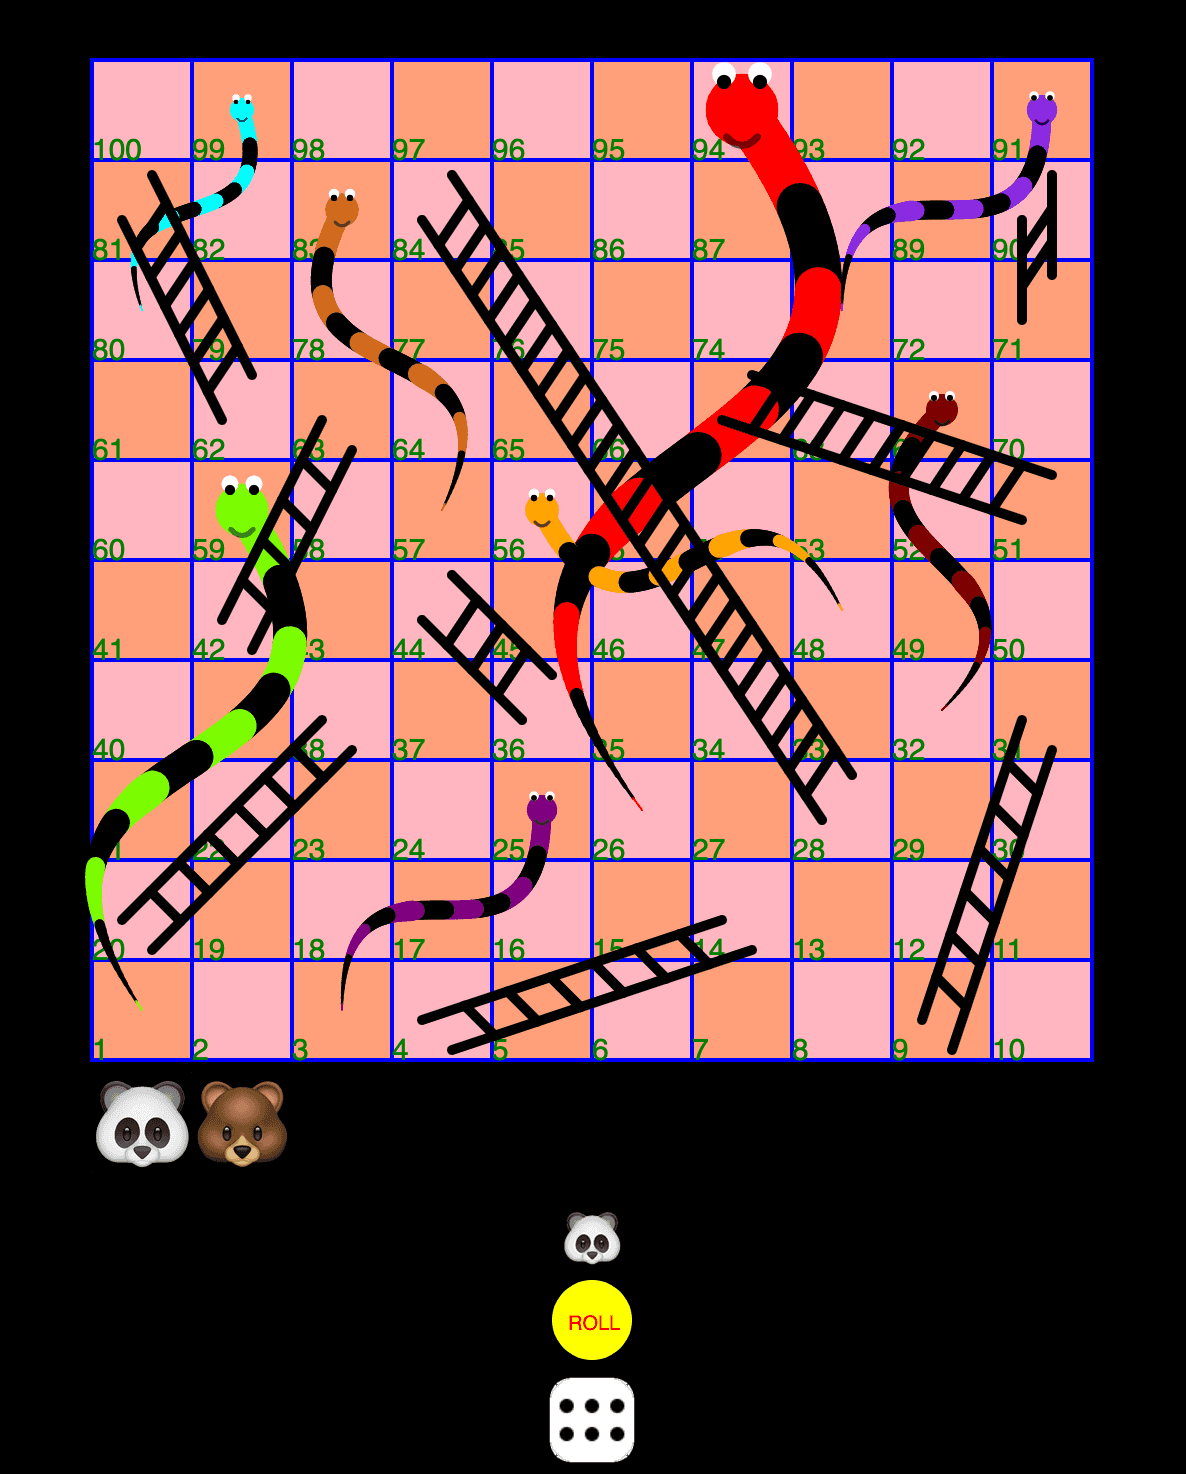 Best Snake and Ladder Game in P5JS